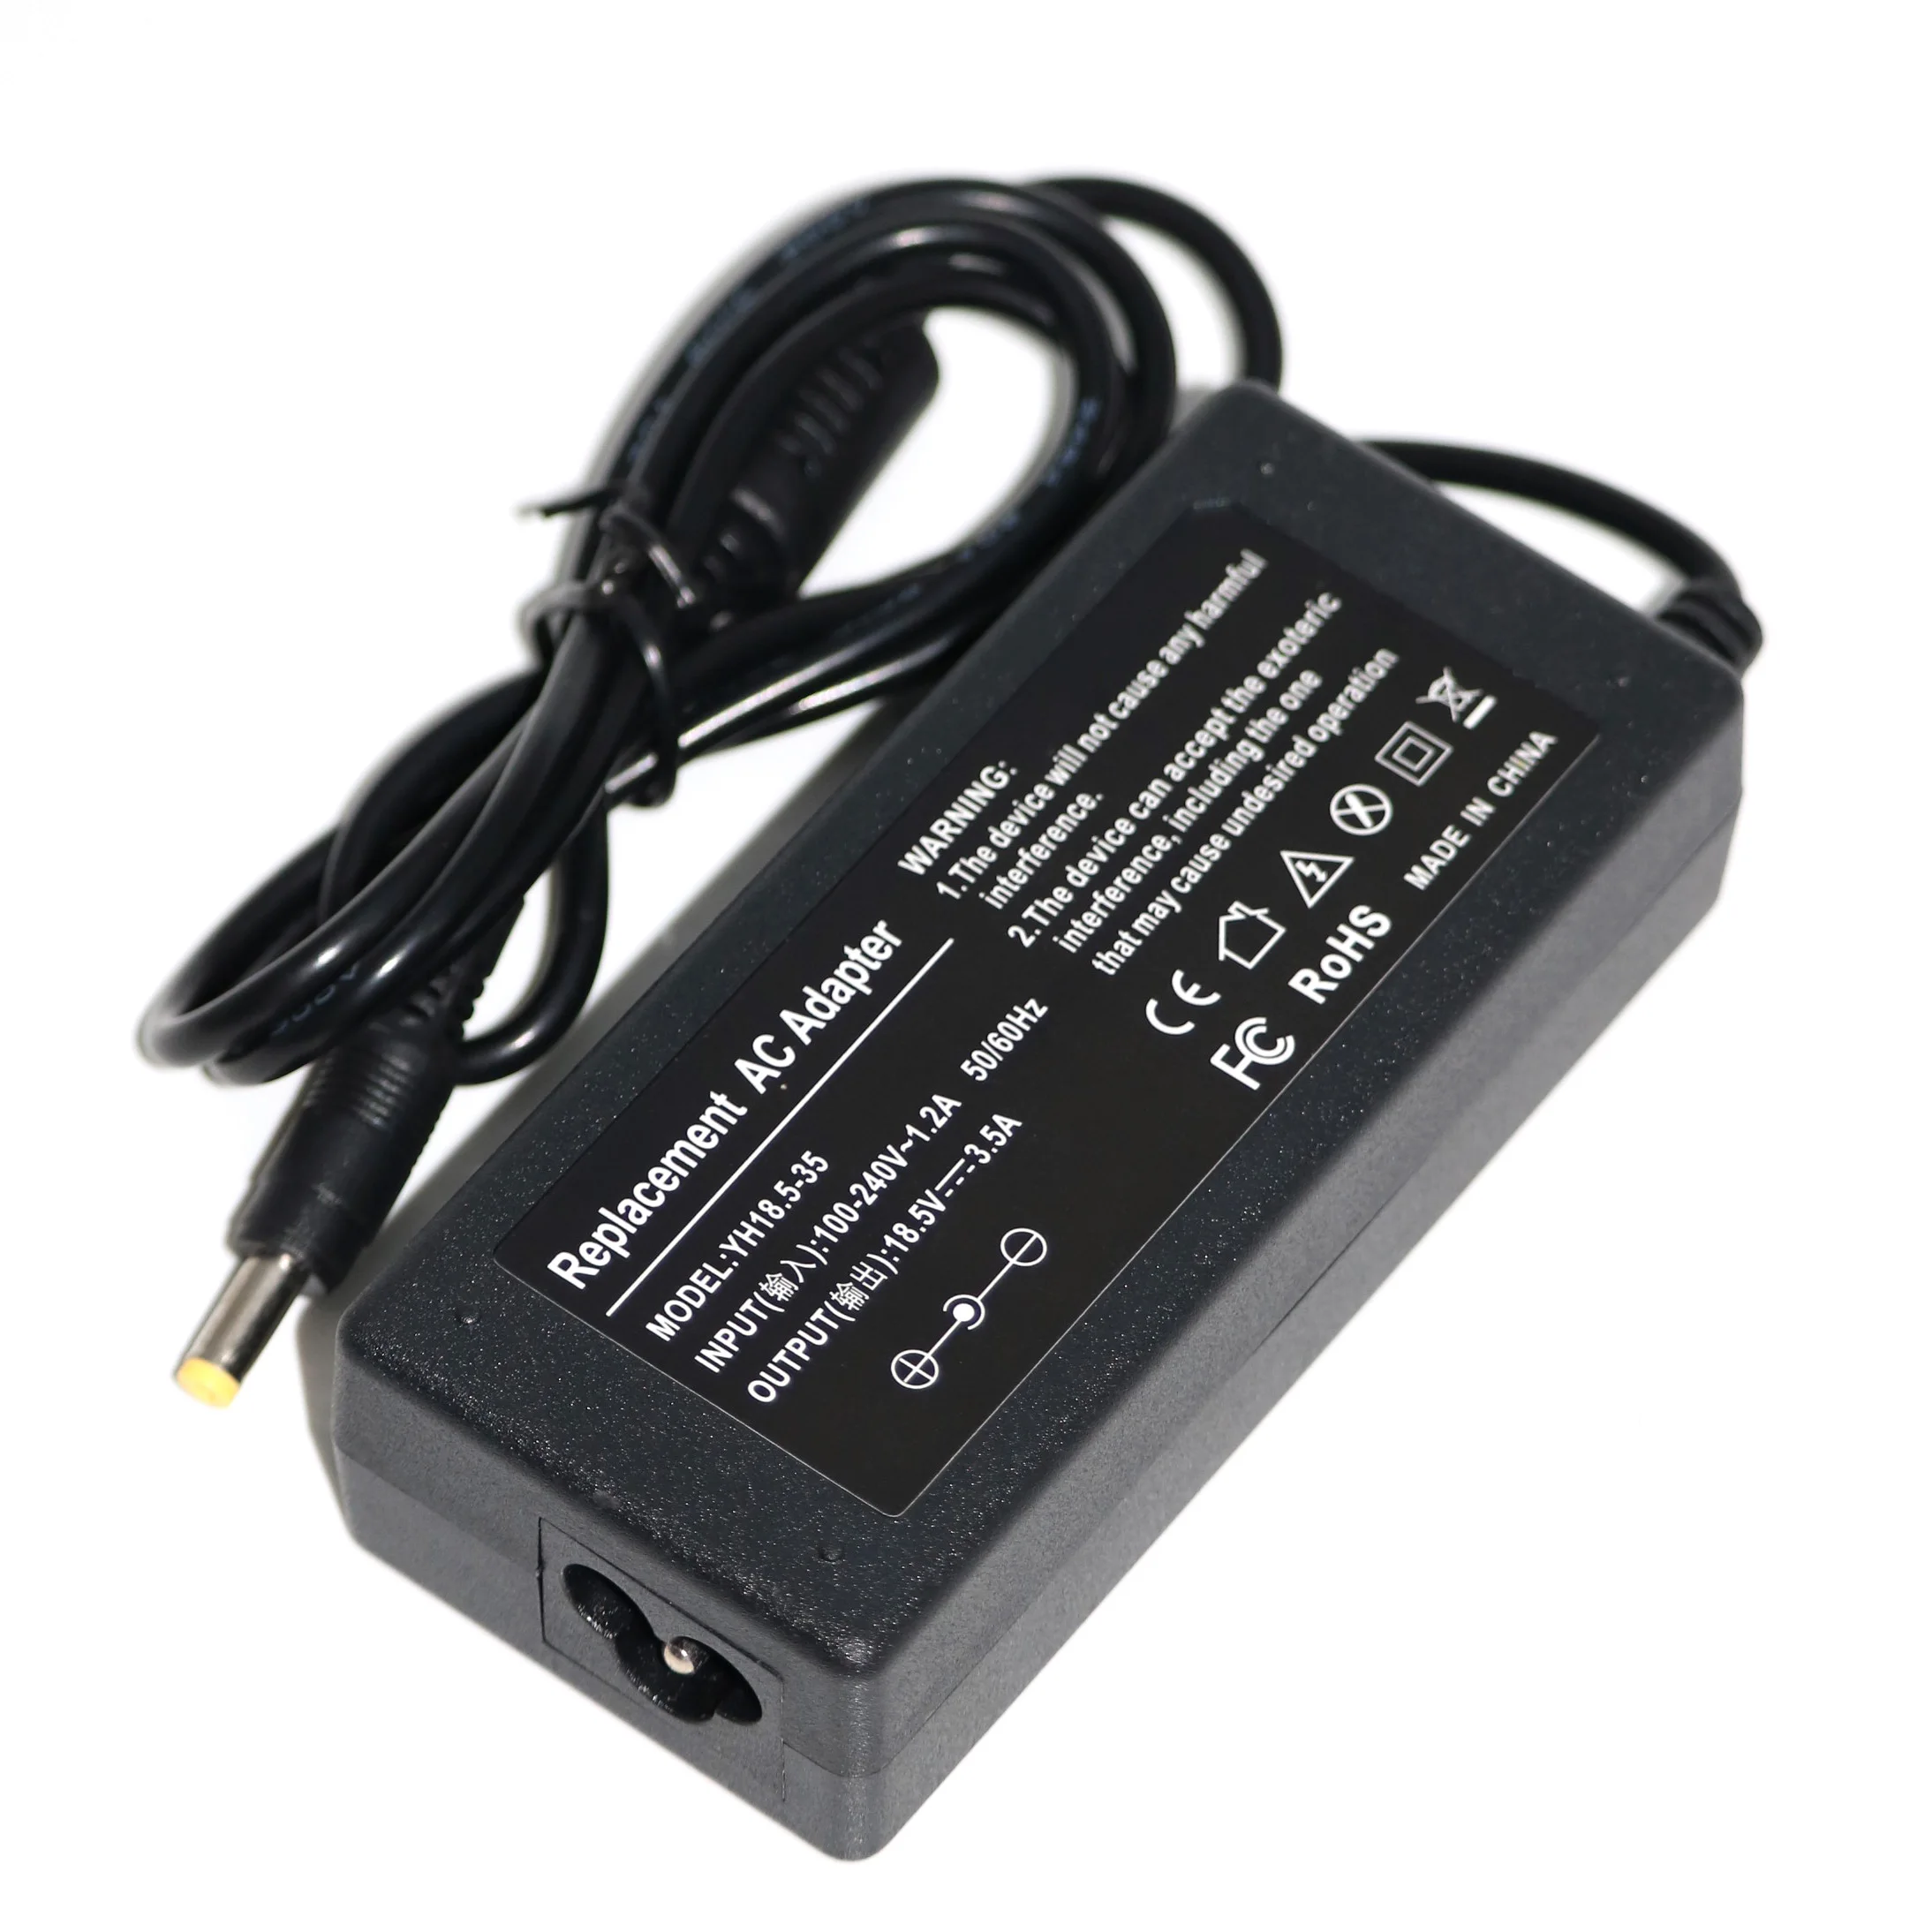 

18.5V 3.5A 4.8*1.7mm 65W AC Laptop Charger Adapter For HP Compaq 6720s 500 510 520 530 540 550 620 625 G3000 pavilion dv4000